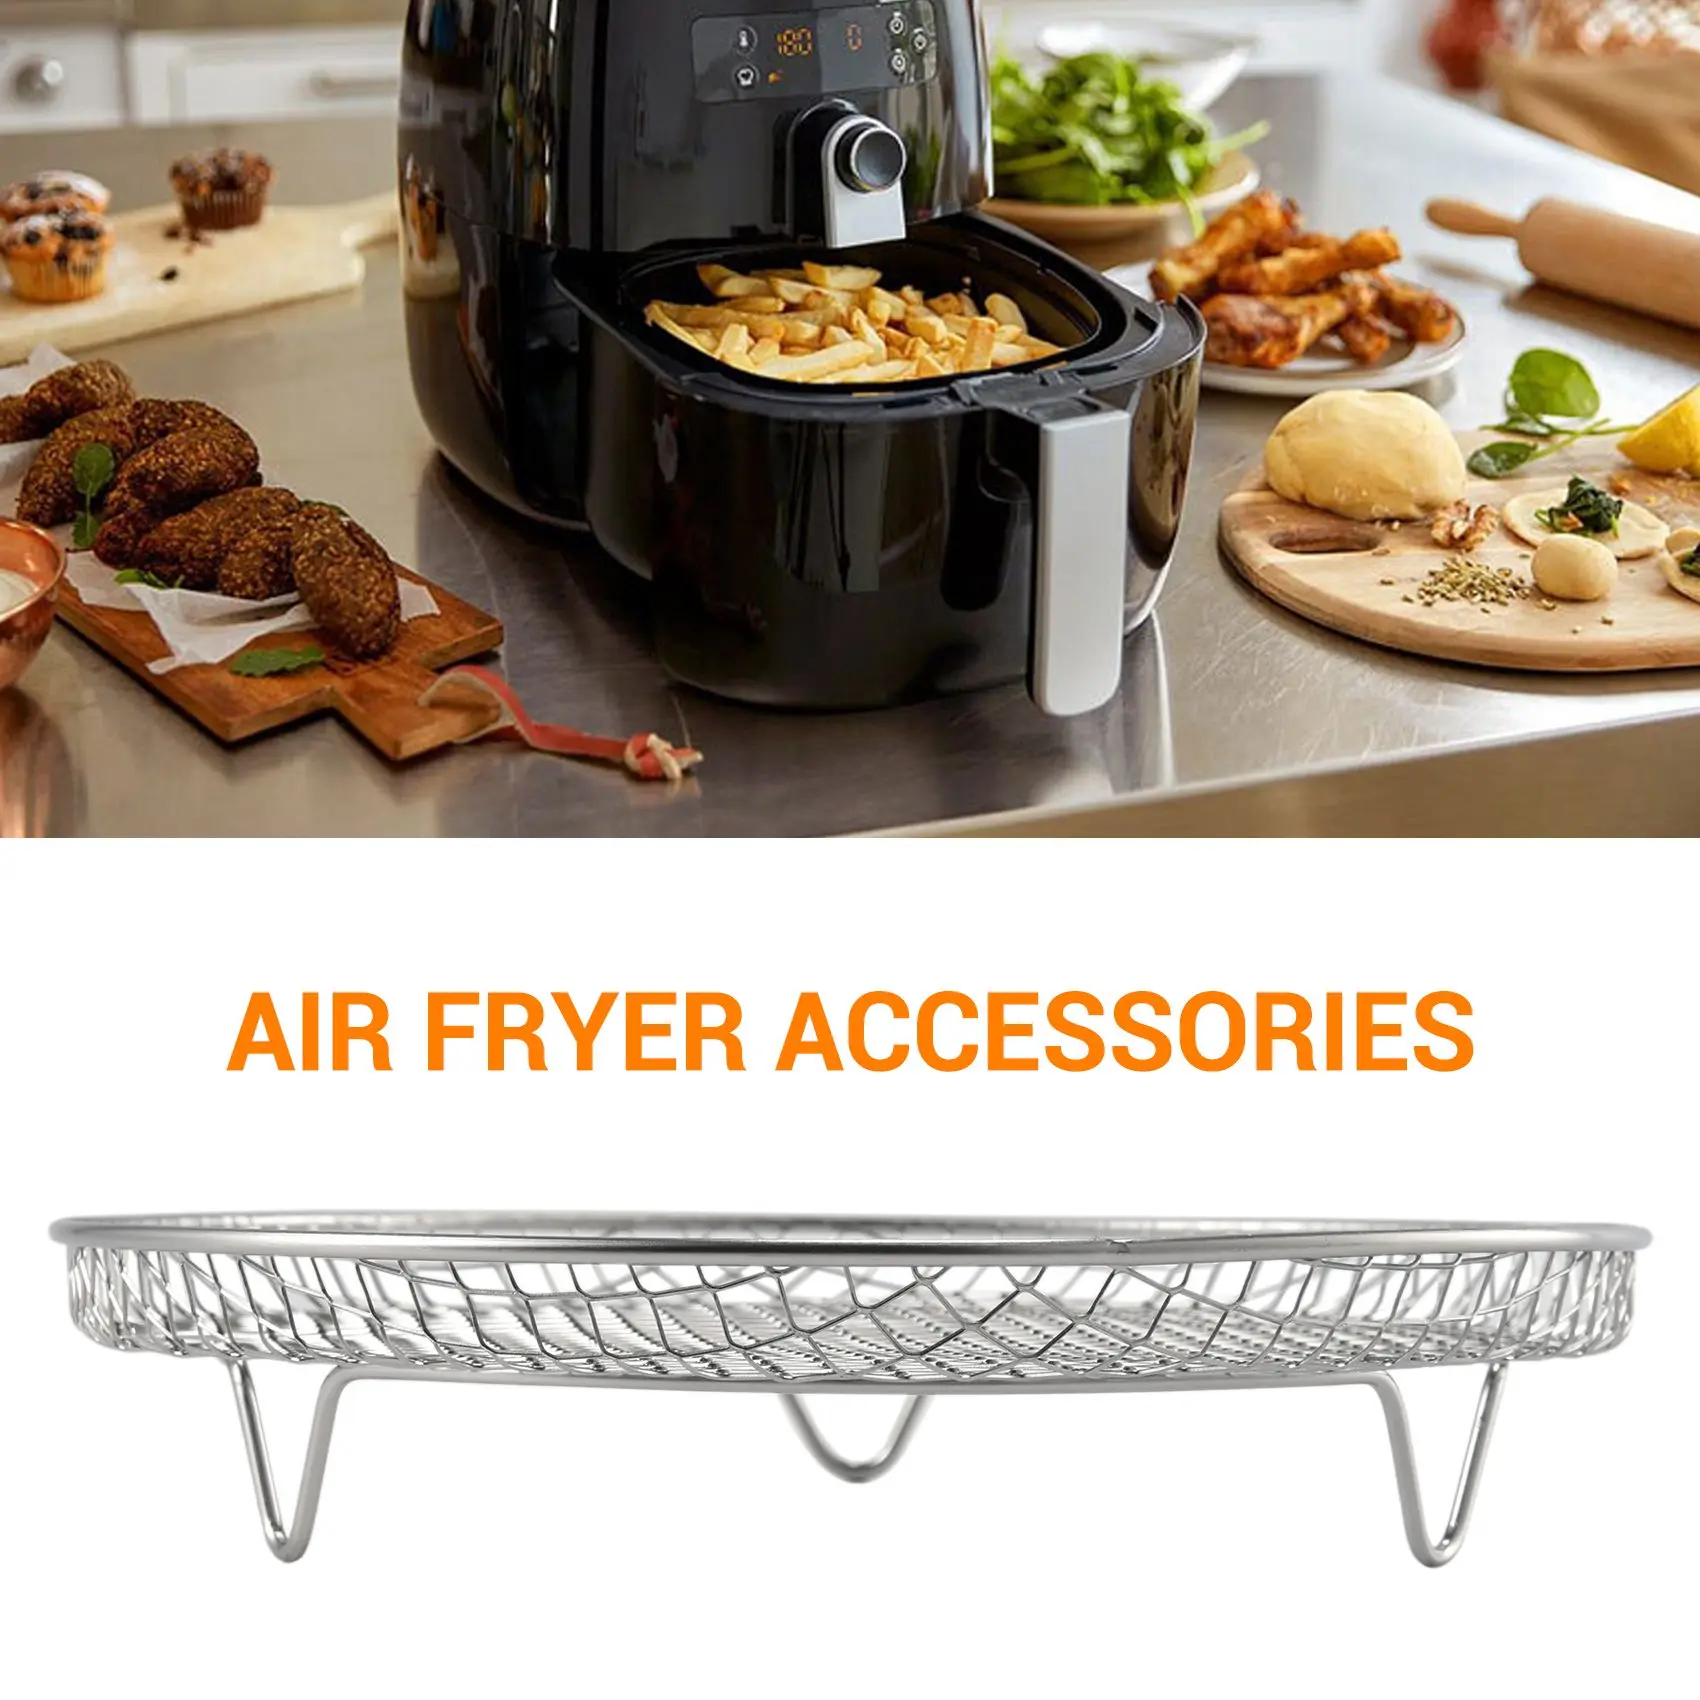 Air Fryer Accessories Three Stackable Racks for Gowise Phillips